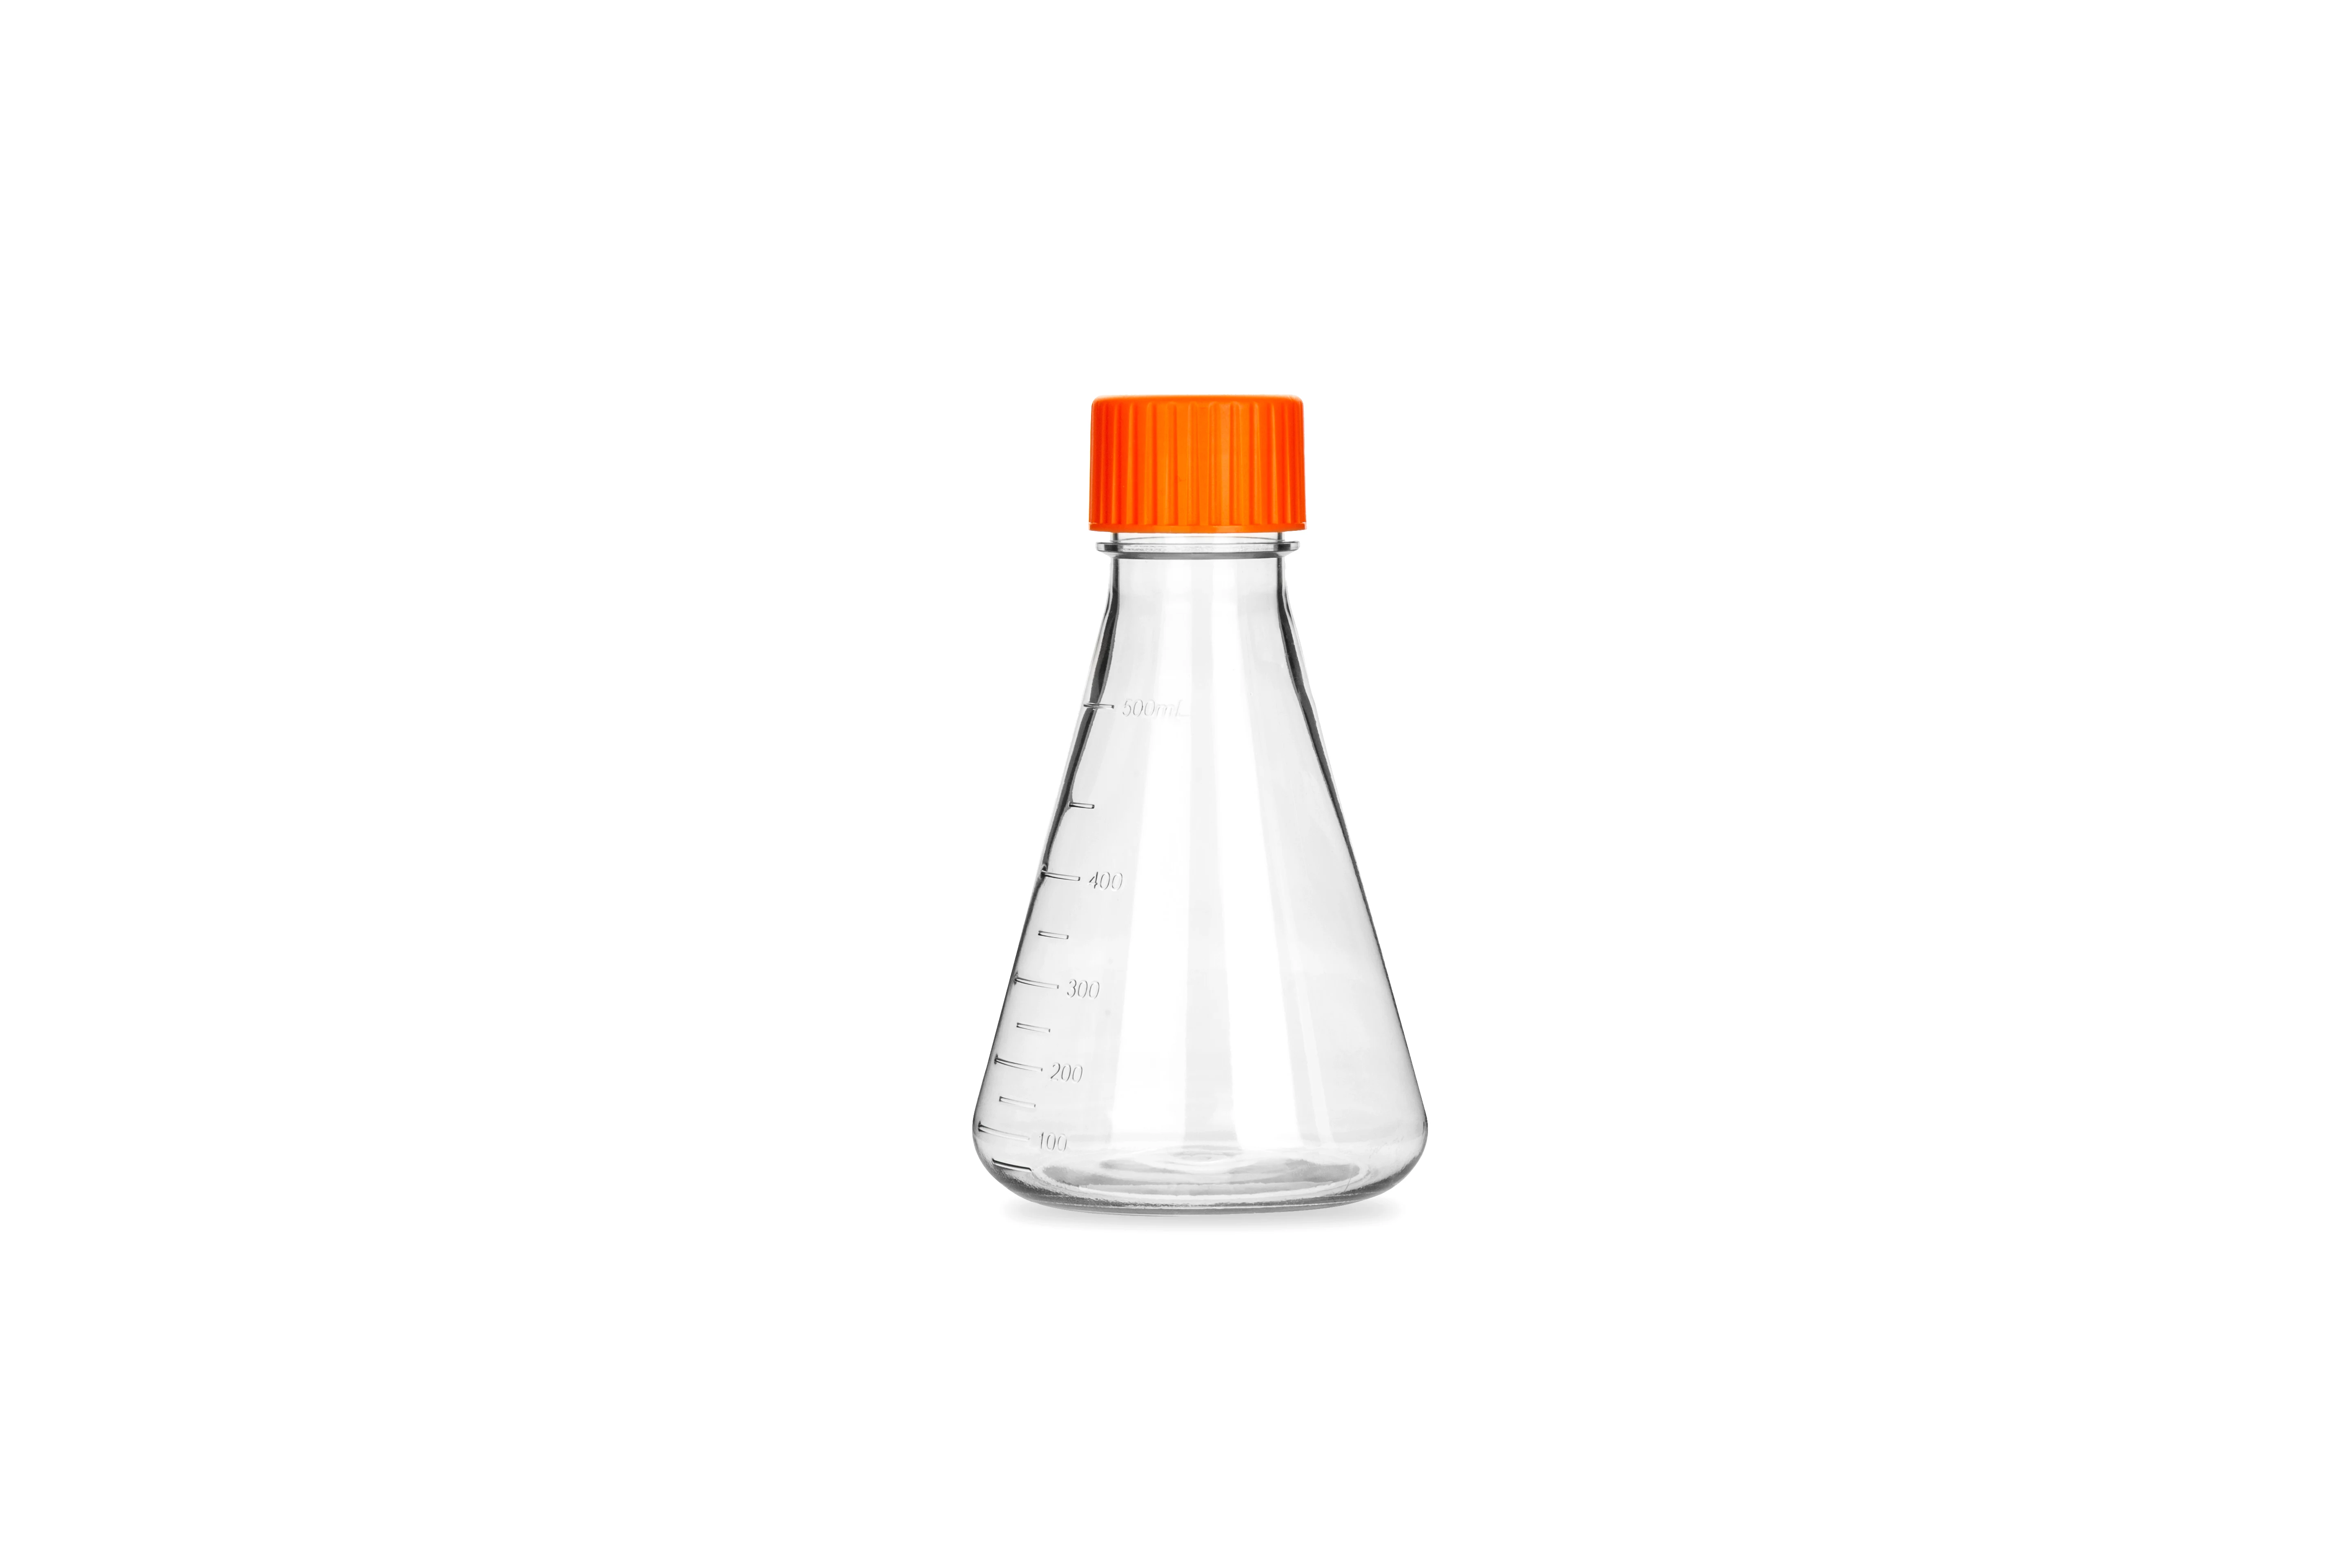 Made in china cheap hot superior quality flask plastic erlenmeyer 500ml